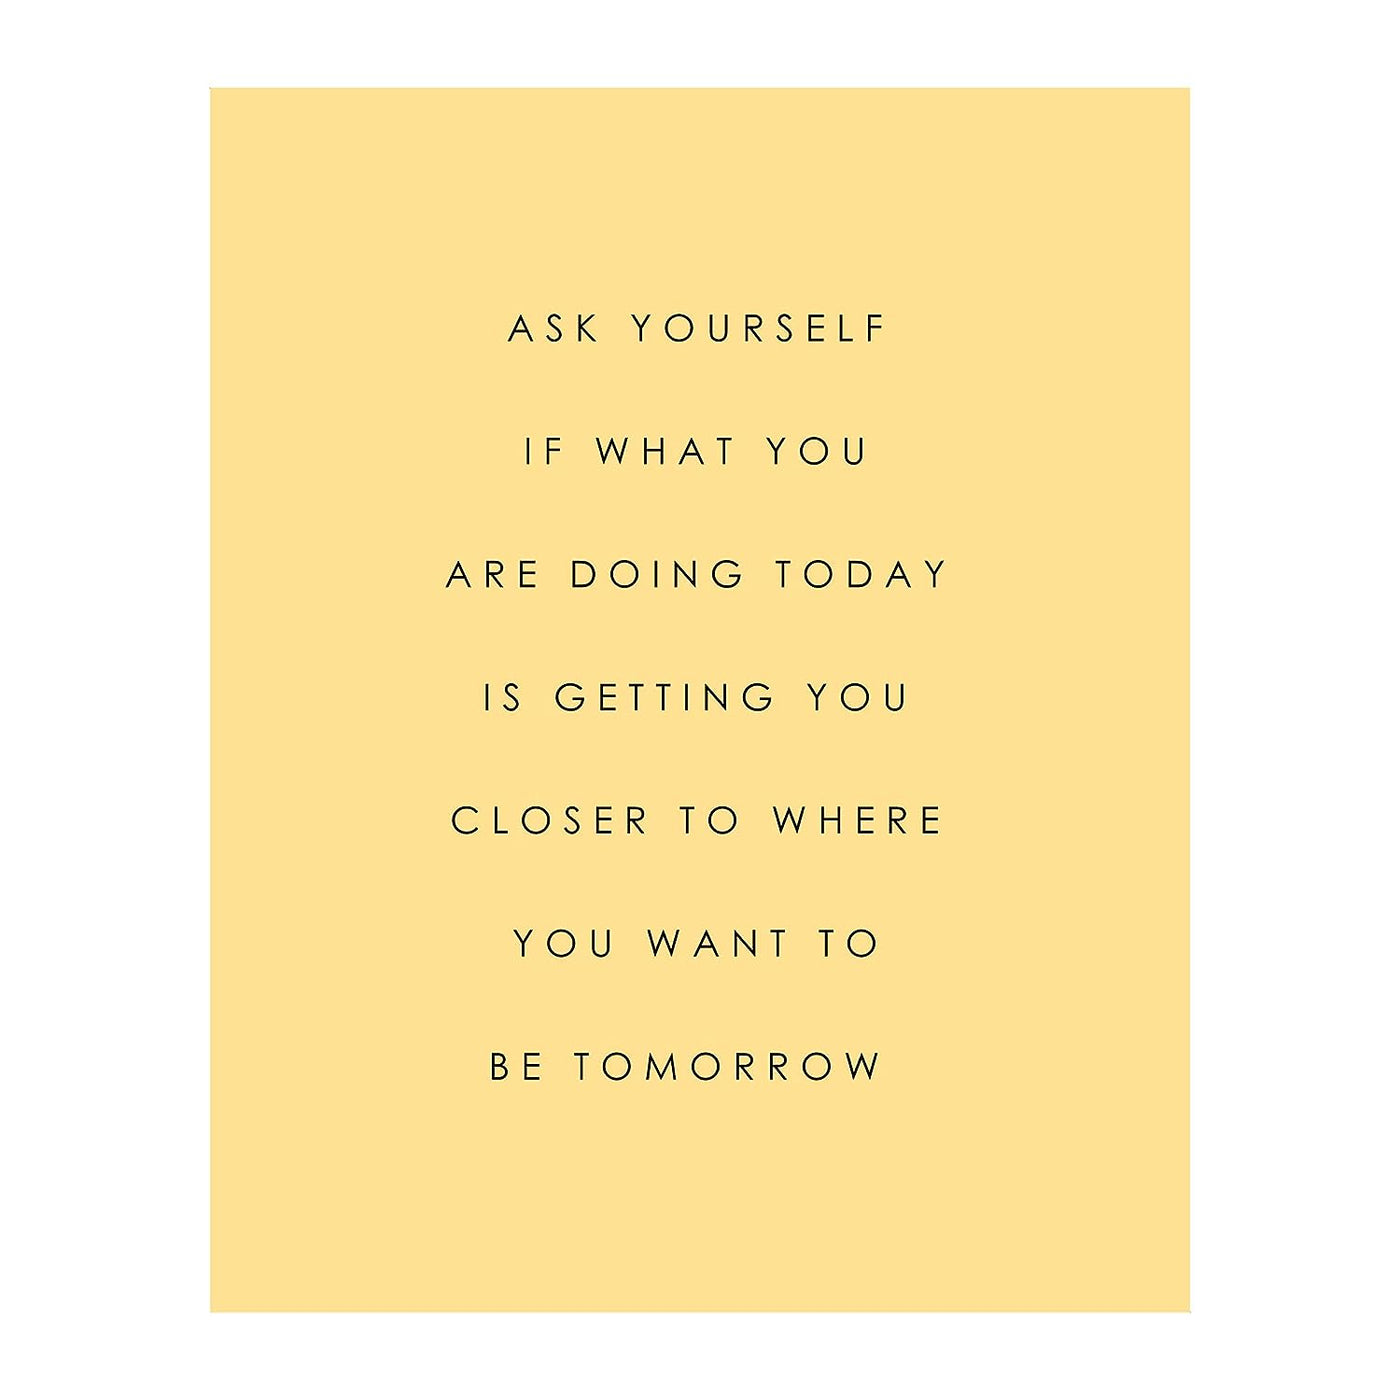 Ask Yourself-What Is Getting You Closer Motivational Quotes Wall Decor -8 x 10" Inspirational Art Print-Ready to Frame. Modern Home-Office-Classroom-Dorm Decor. Great Positive Sign for Motivation!